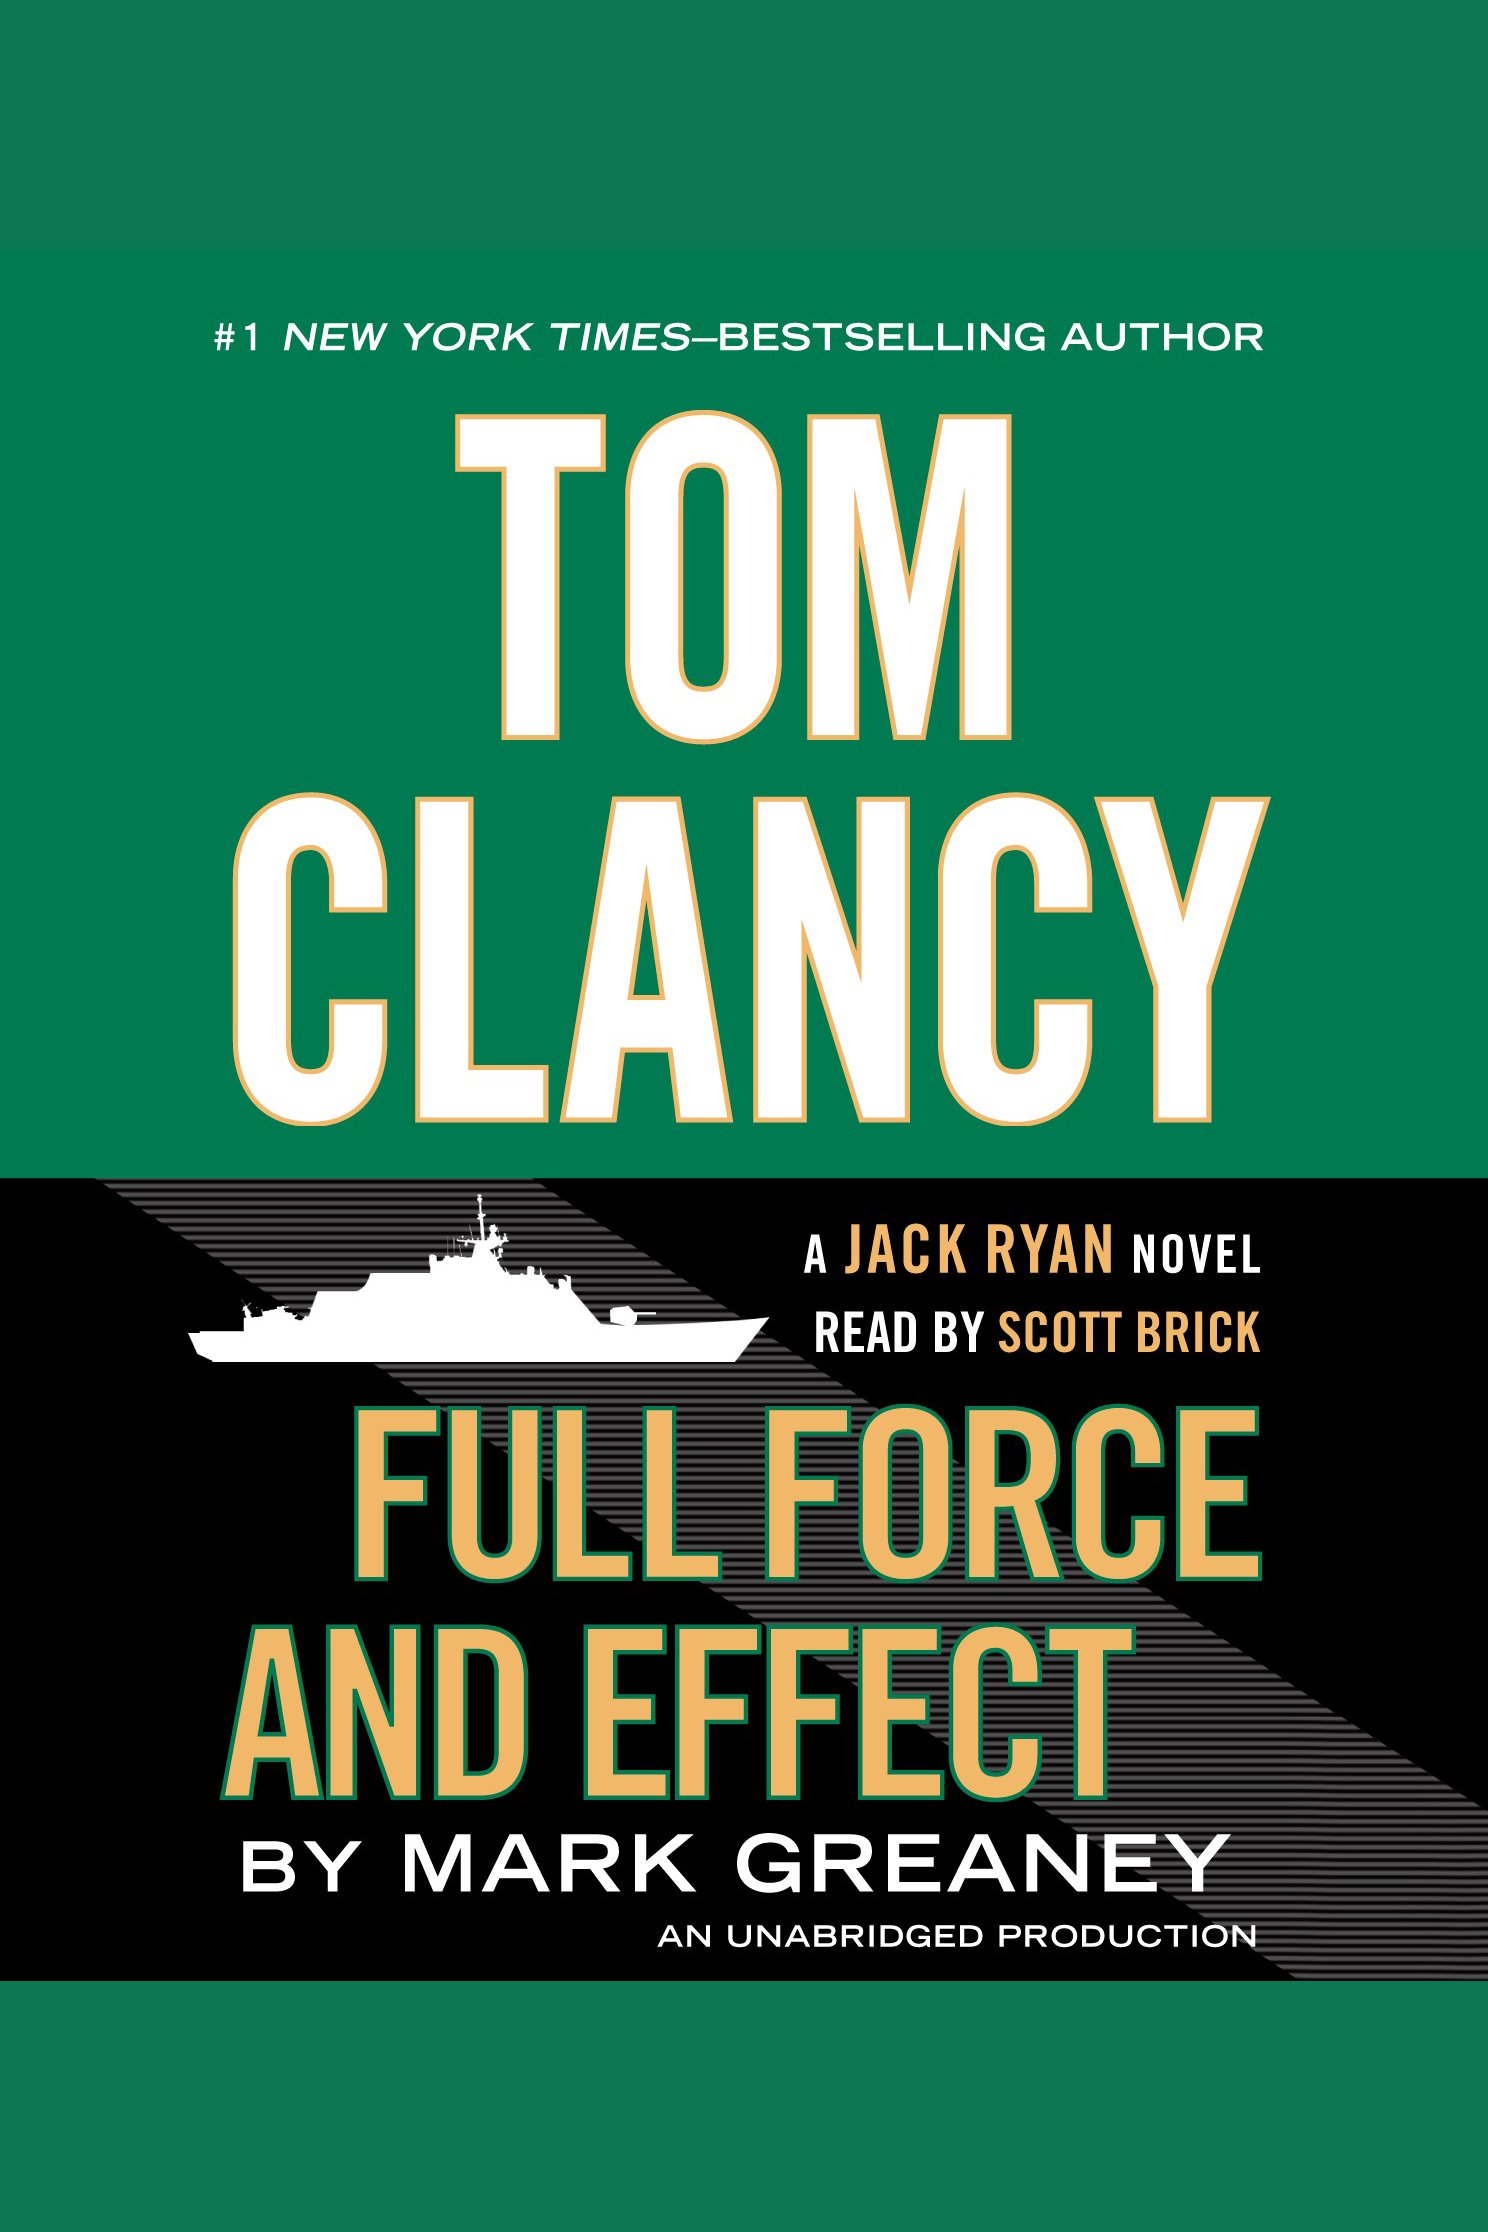 Tom Clancy full force and effect cover image